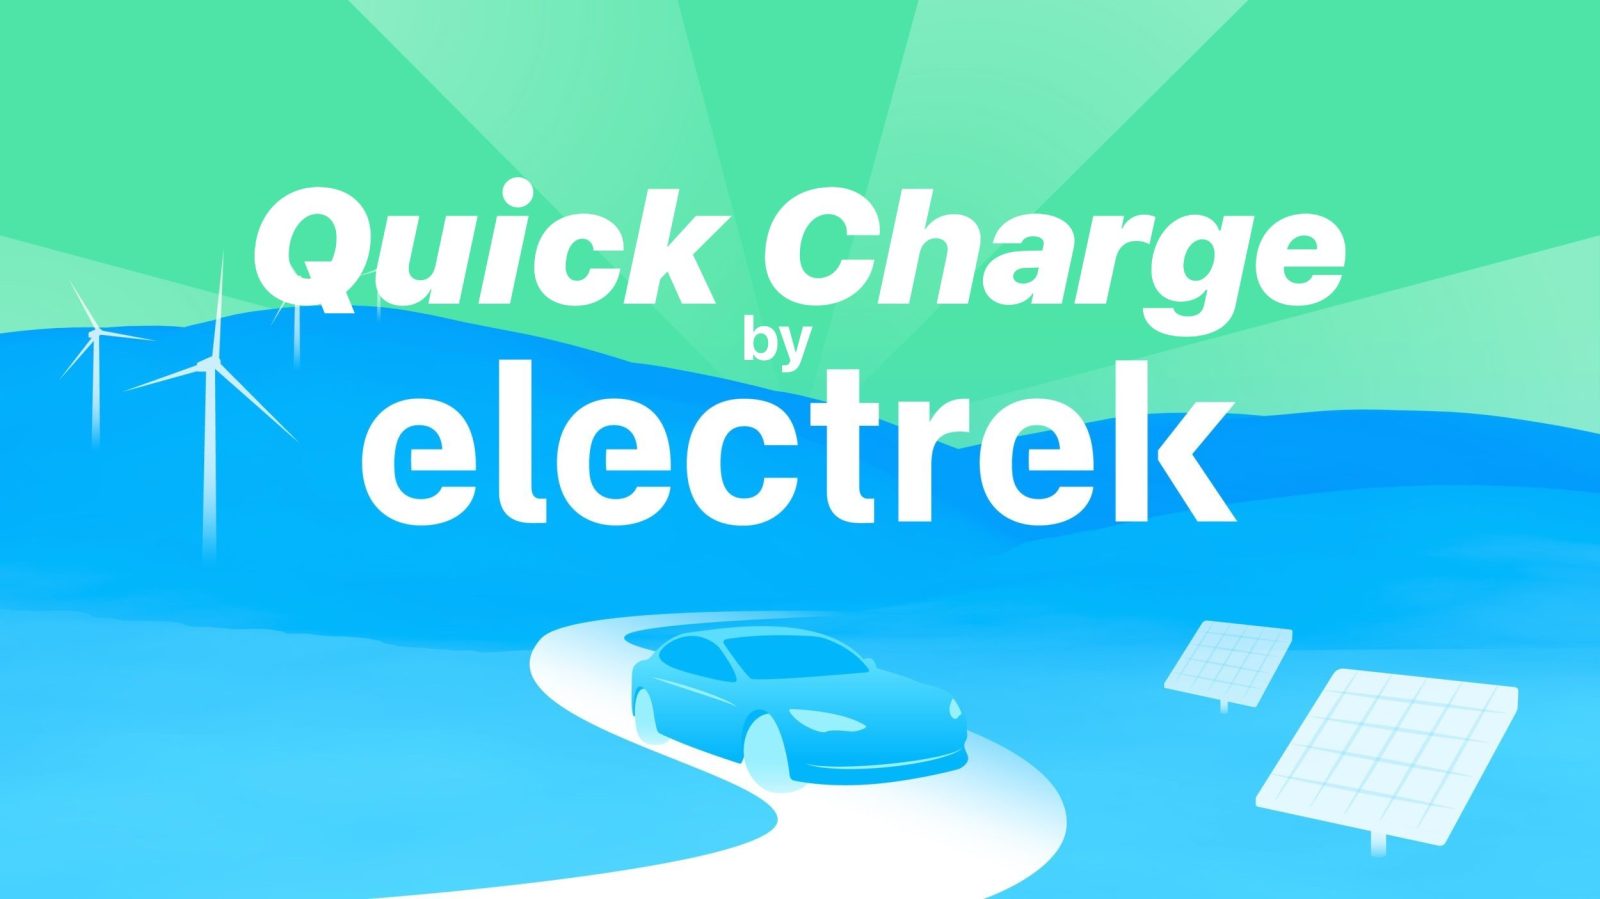 Quick Charge Podcast: May 24, 2022